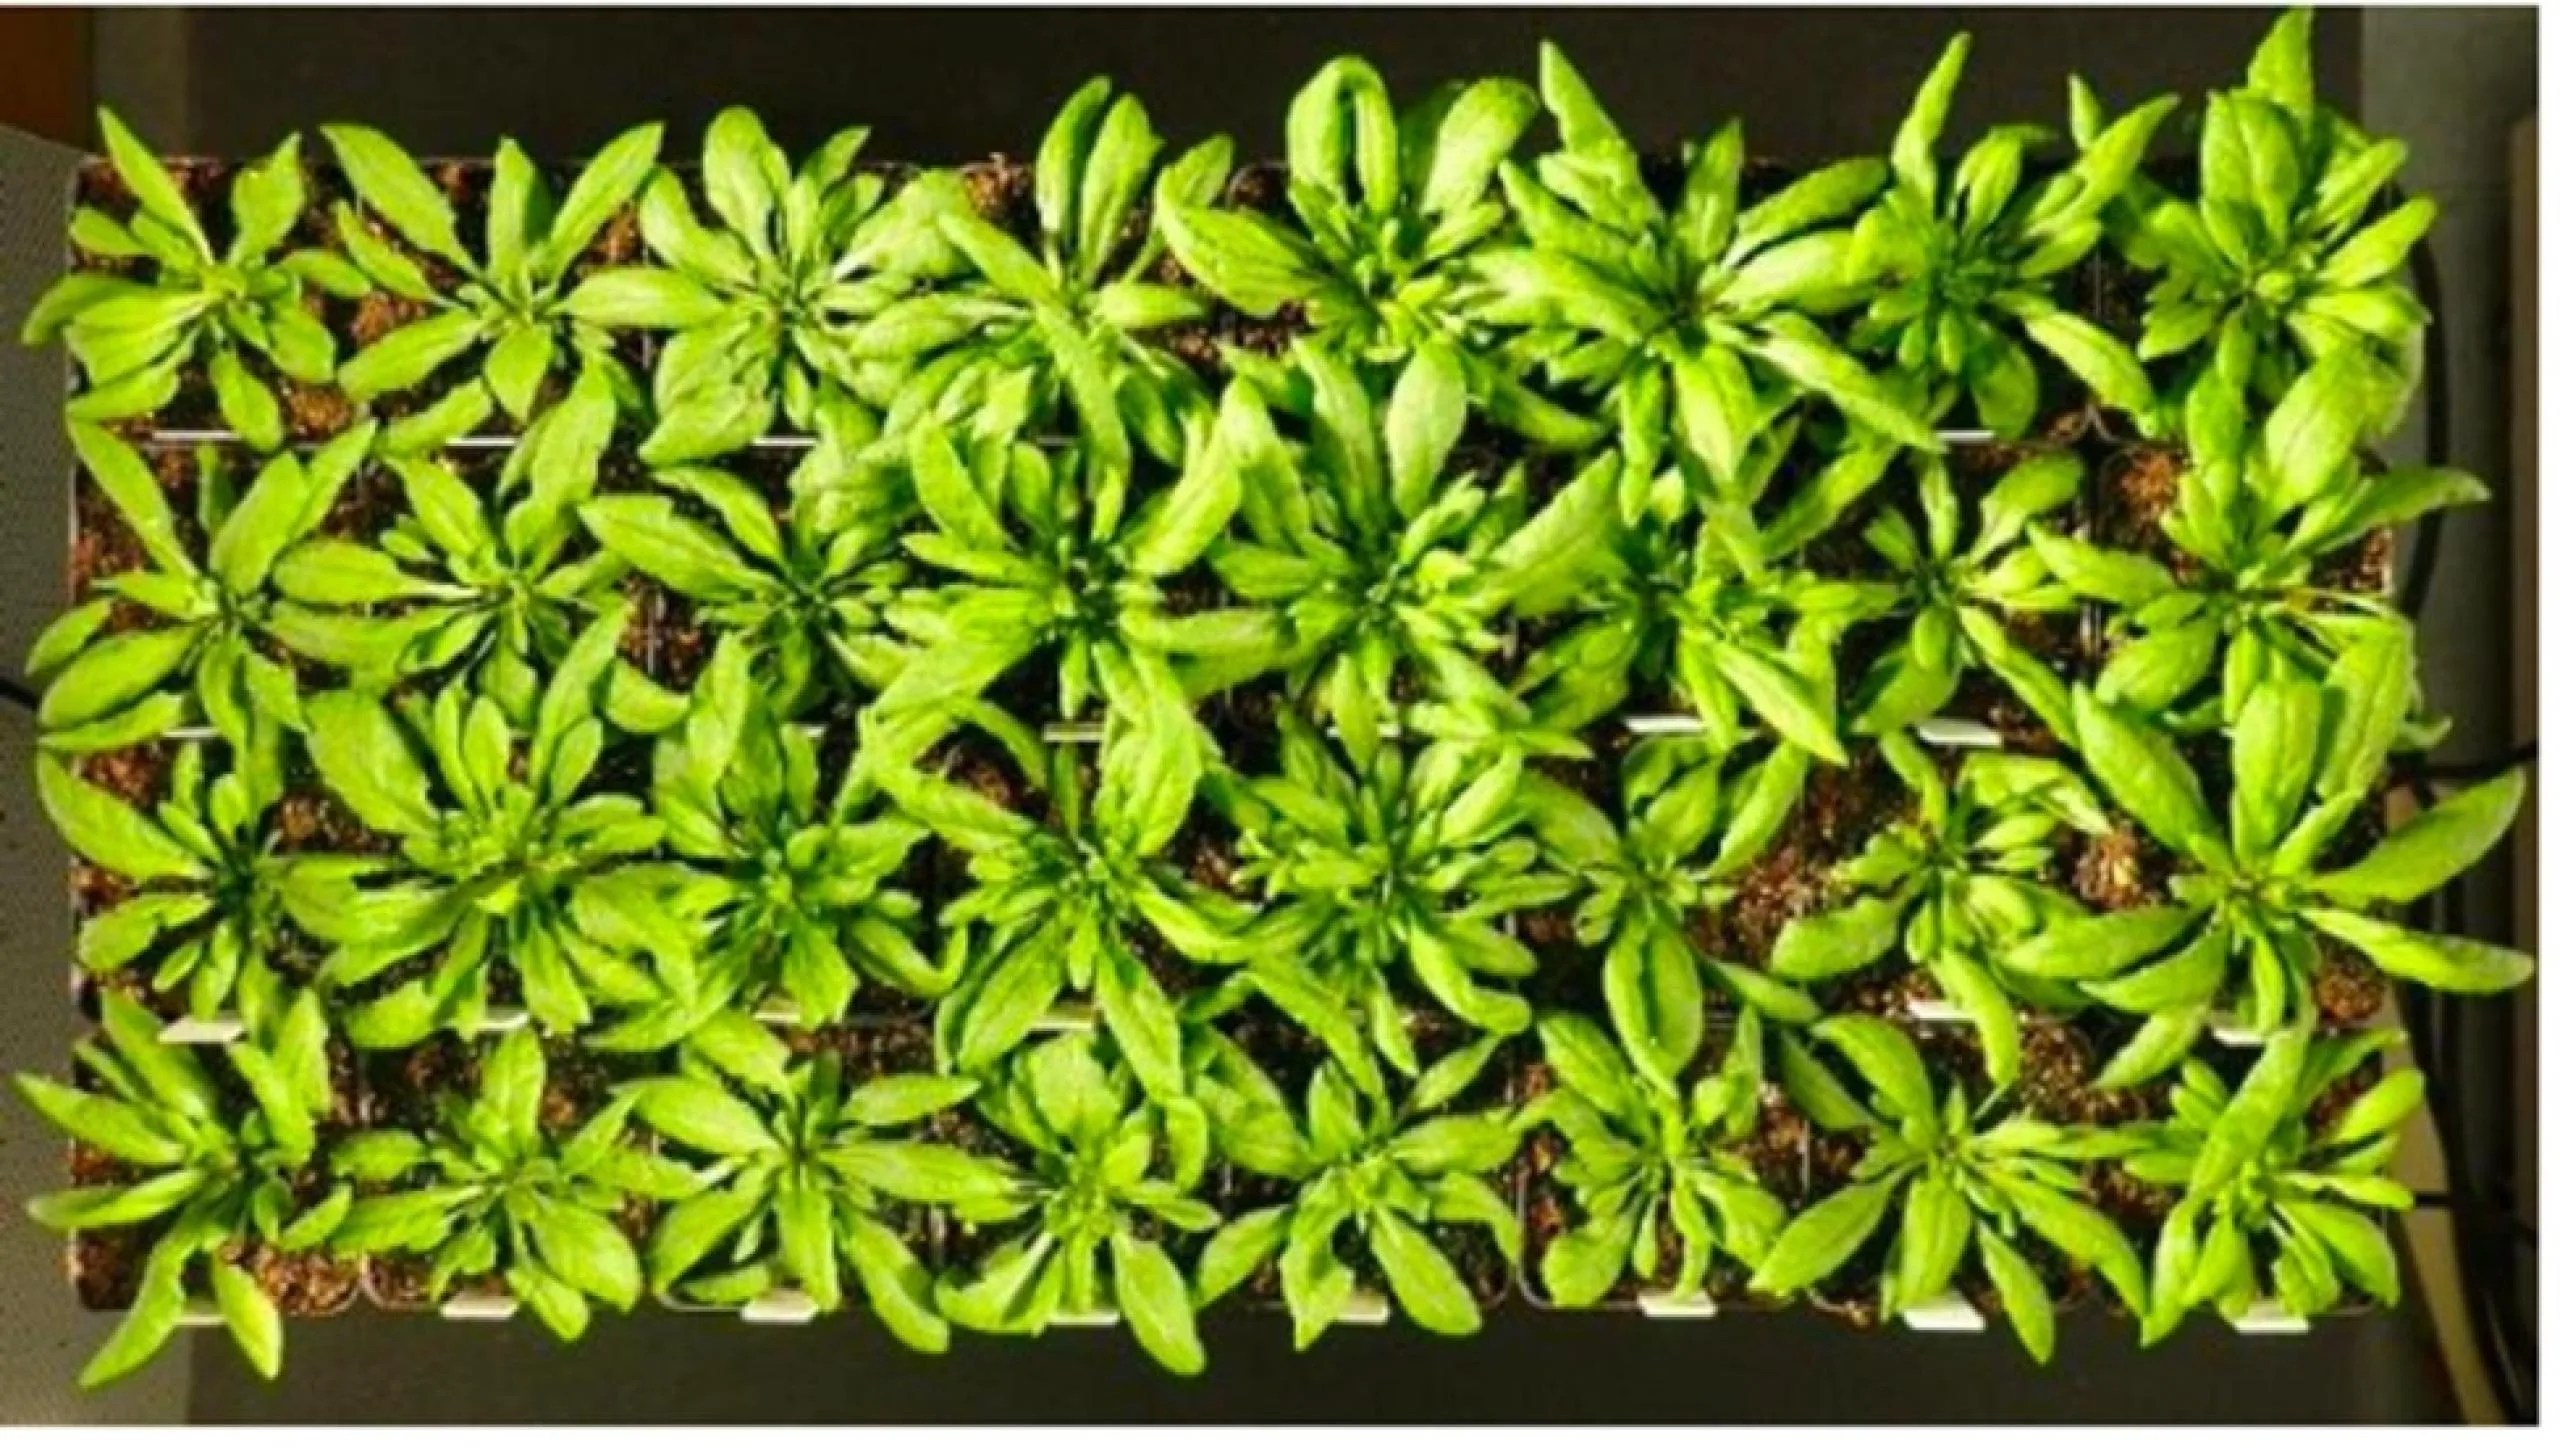 An overhead view of one large rectangular box sectioned with 32 smaller squared boxes of leafy green plants. Each lush plant has 8-12 oblong leaves.